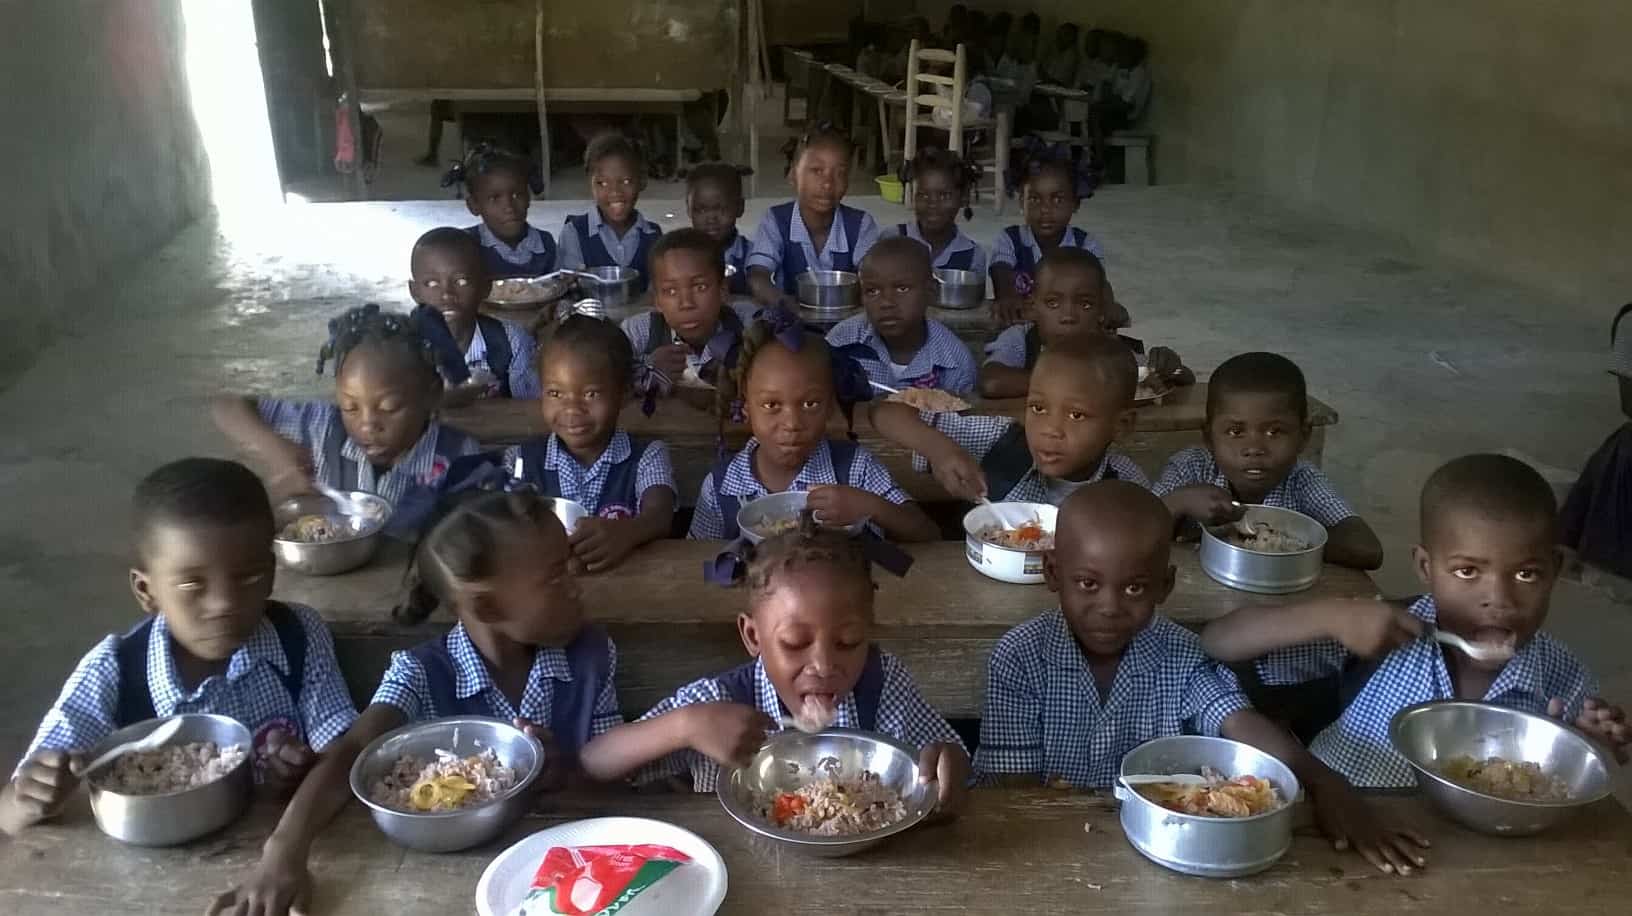 The Charities Commission has launched a statutory inquiry into the Jela Foundation - which runs a school in Haiti - over alleged financial irregularities in its accounts (Image: Jela Foundation)